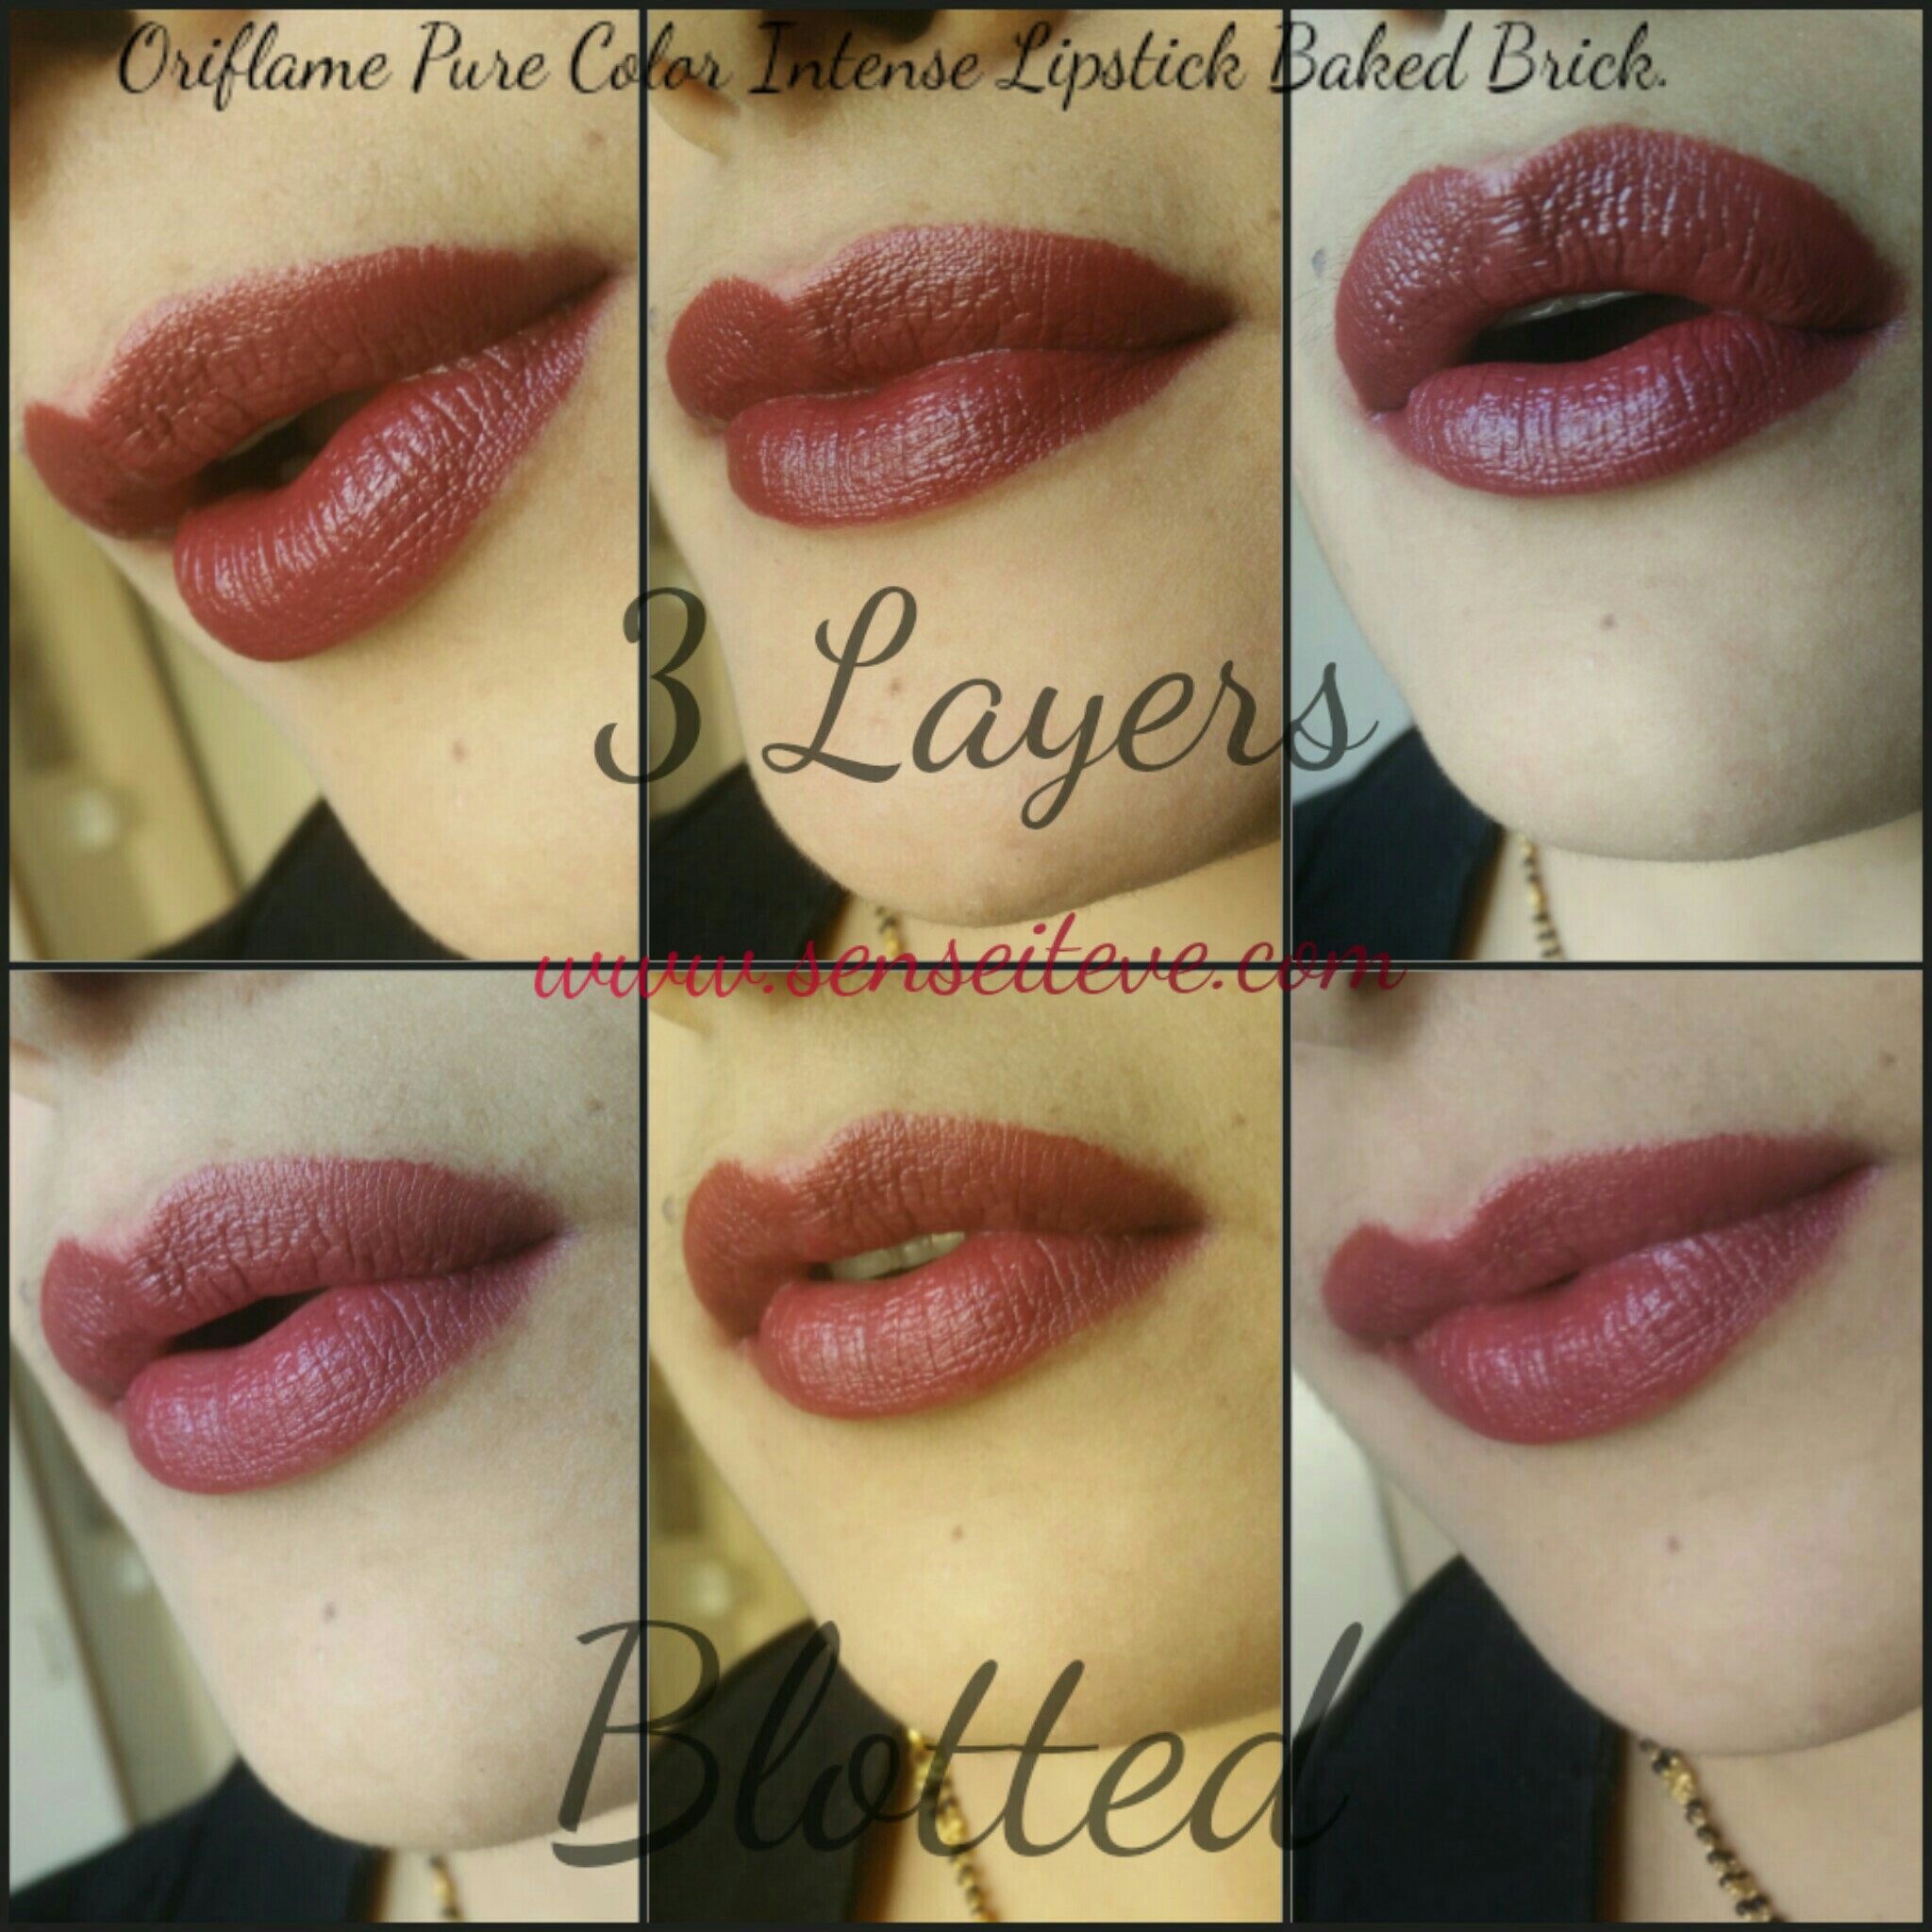 Oriflame Pure Color Intense Lipstick Baked Brick Swatches 30824